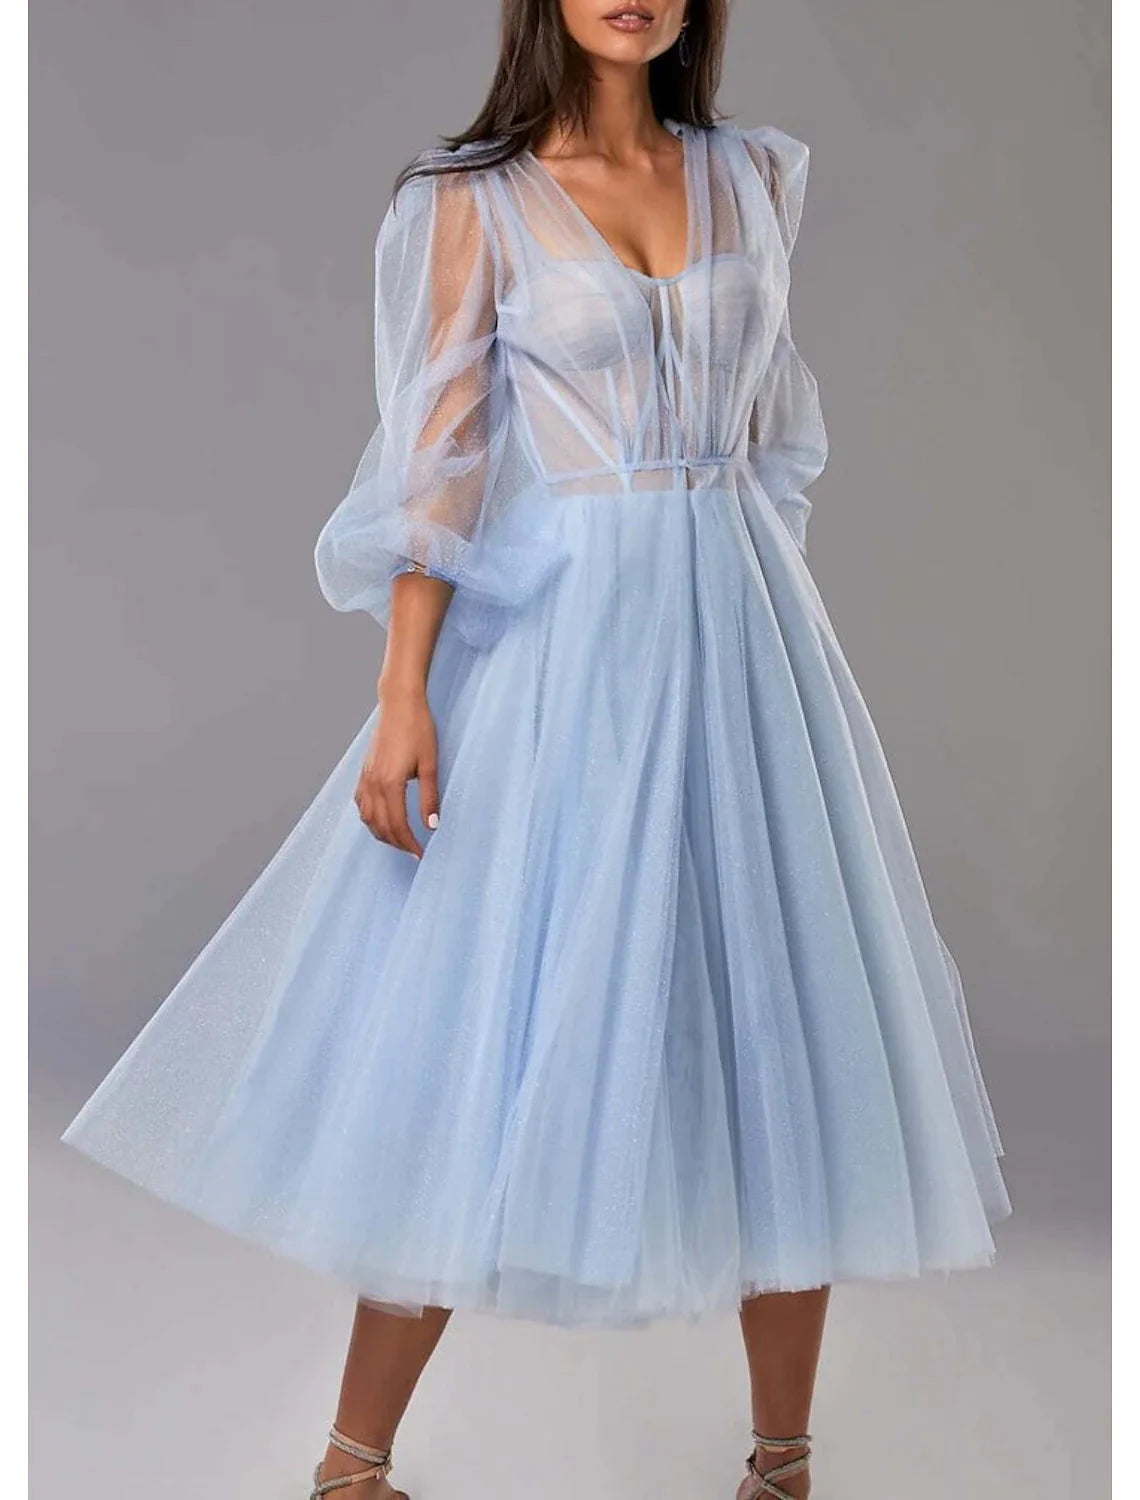 Two Piece A-Line Prom Dresses Elegant Dress Wedding Guest Tea Length Half Sleeve Sweetheart Tulle with Pleats Pure Color